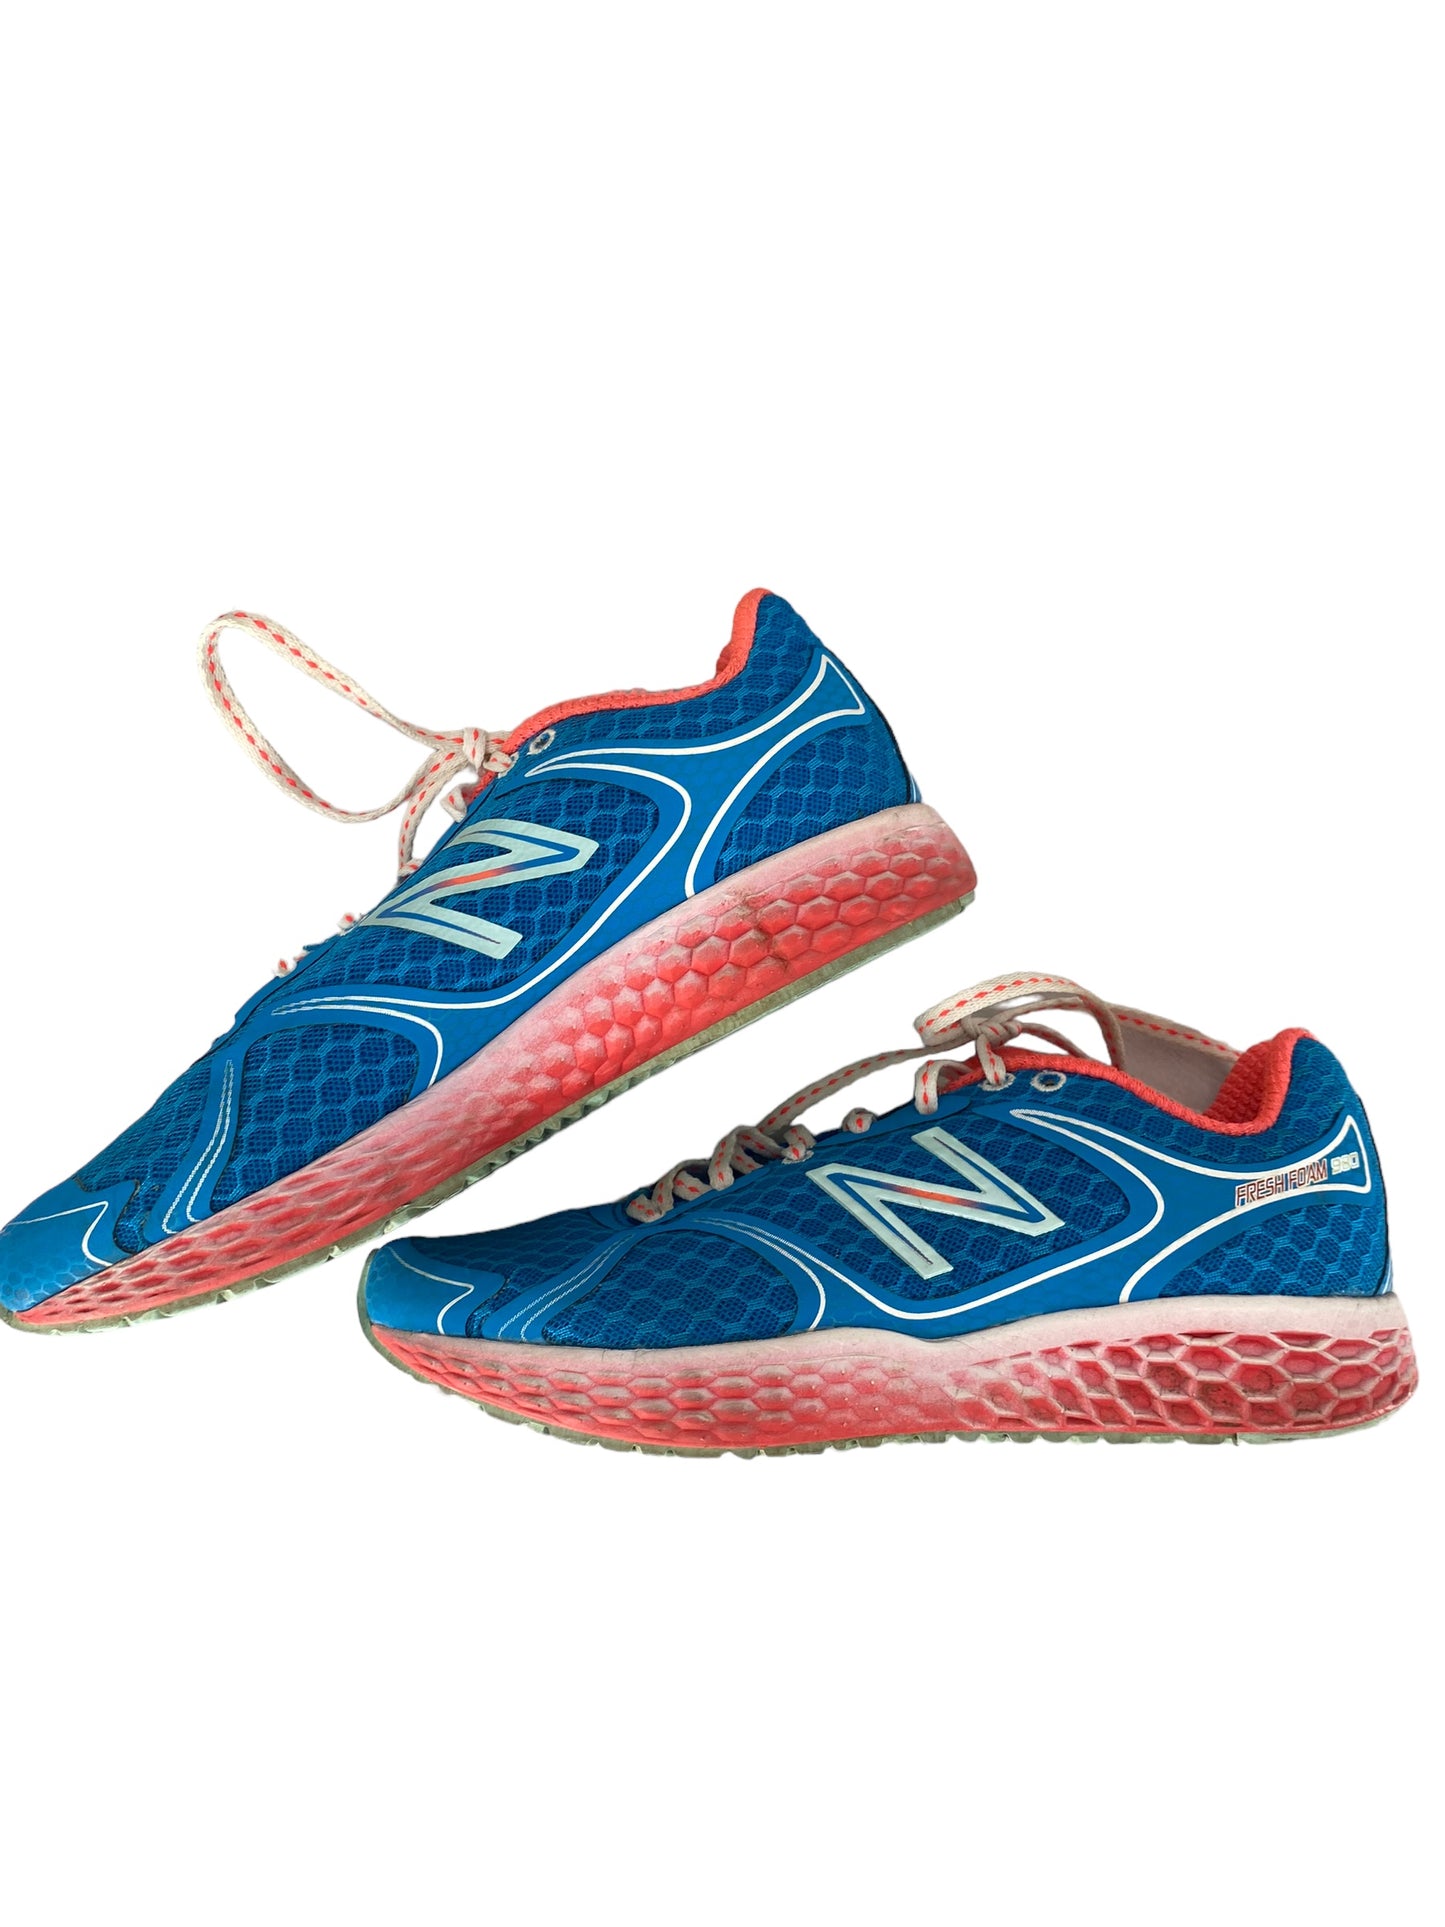 Shoes Athletic By New Balance  Size: 7.5